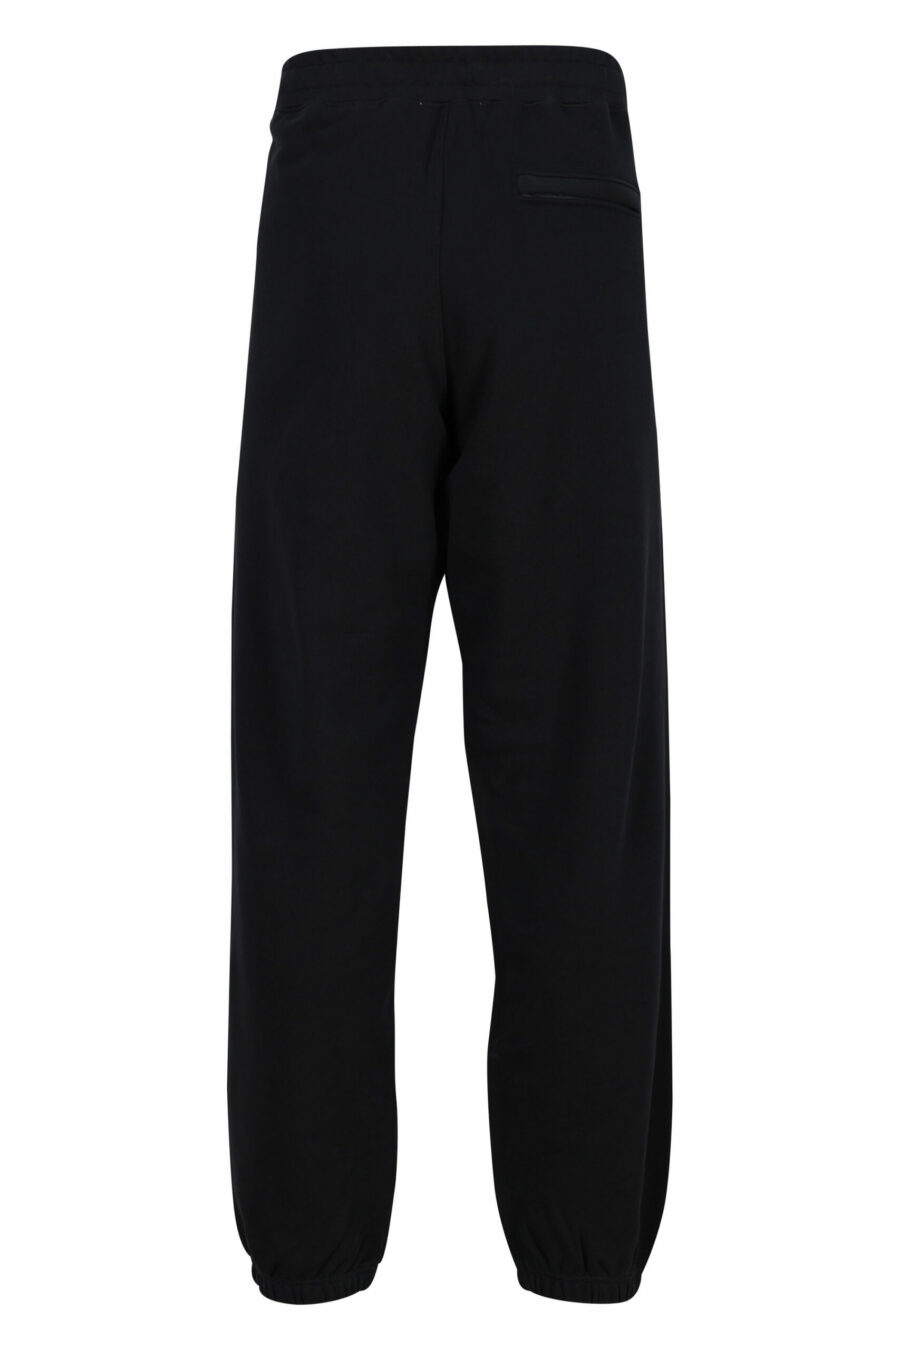 Tracksuit bottoms black with black "teddy" mini-logo - 889316837872 1 scaled